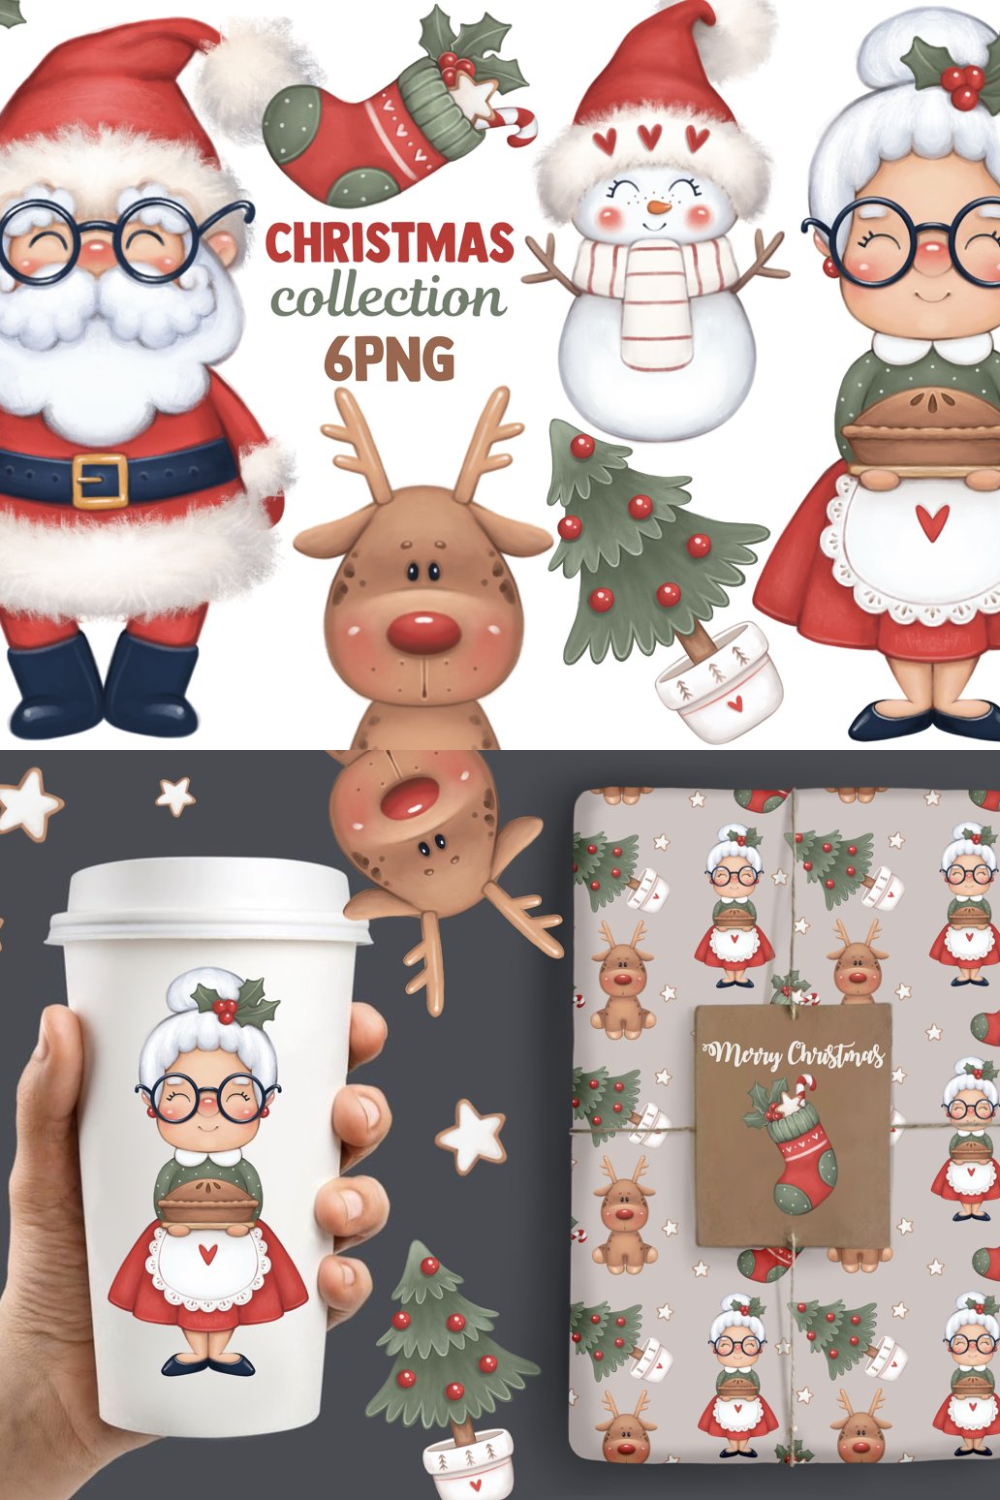 Christmas Collection - Pinterest.